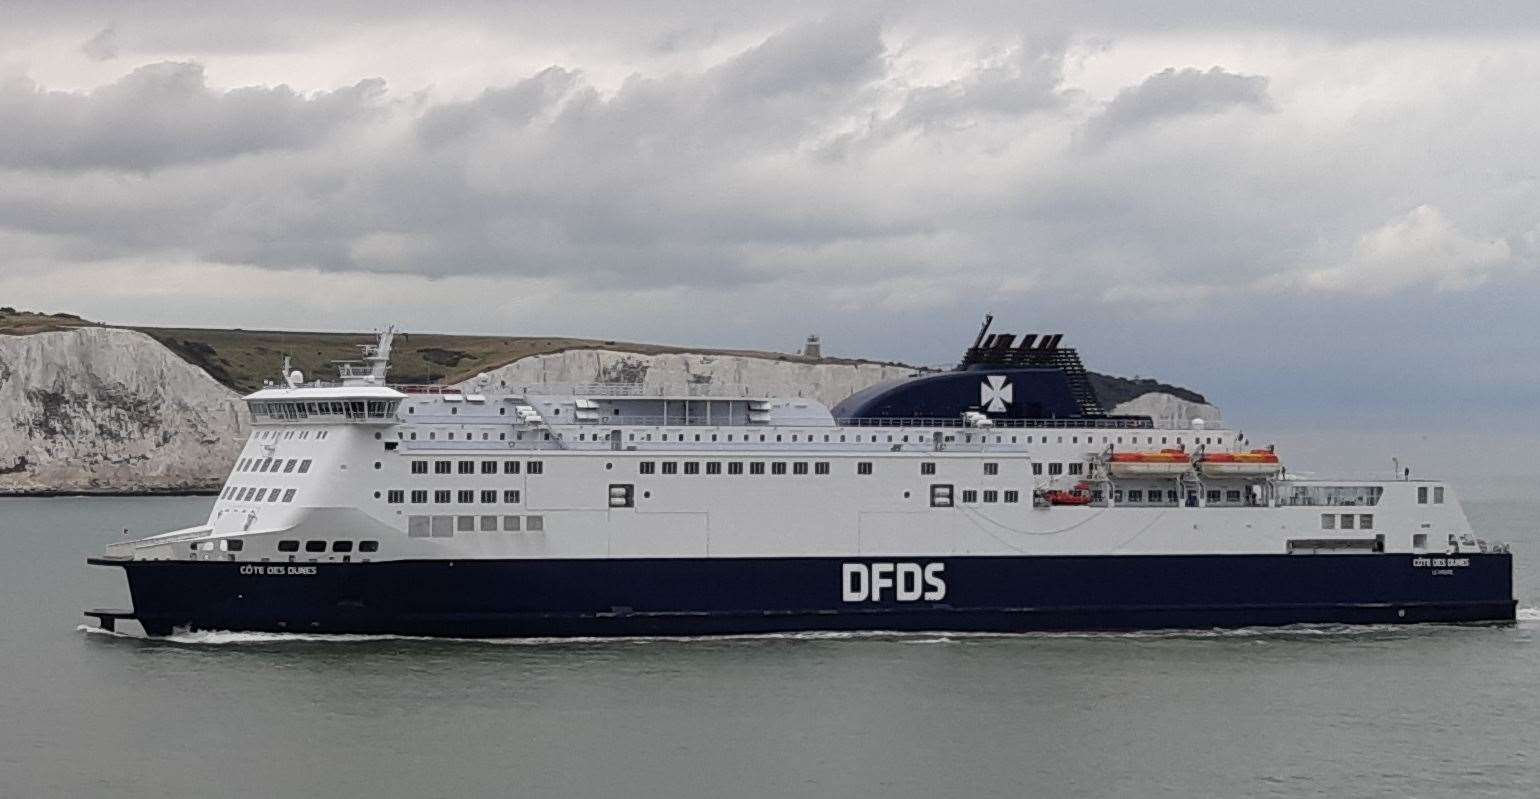 One of the DFDS fleet, Côtes des Dunes, outside Dover where Mrs Hosking was based